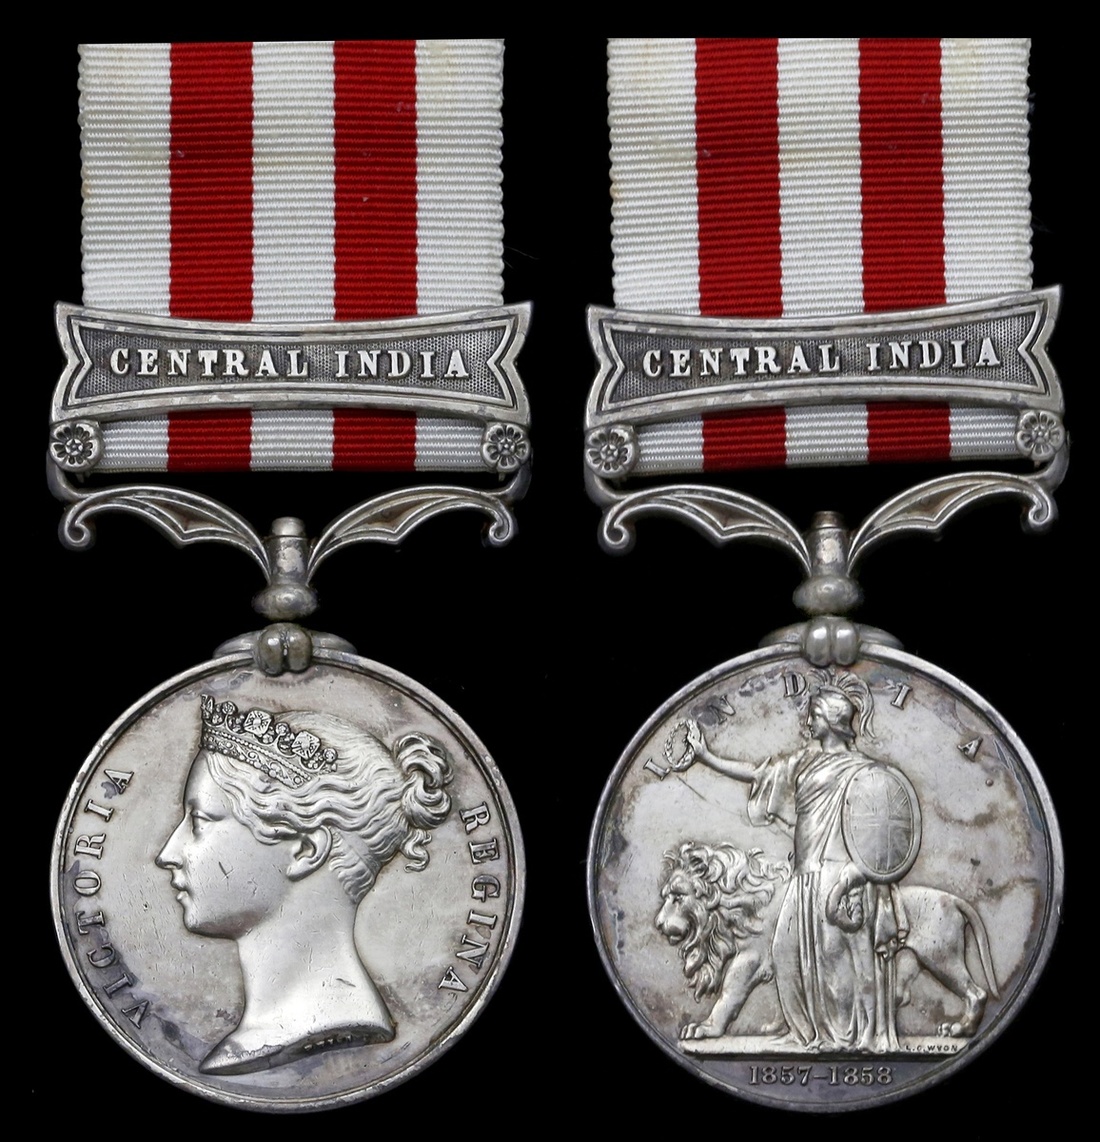 Great Britain. Indian Mutiny, 1857-1858. One clasp: "Central India" (FARRIER. W. LYONS. 14TH LGT DR